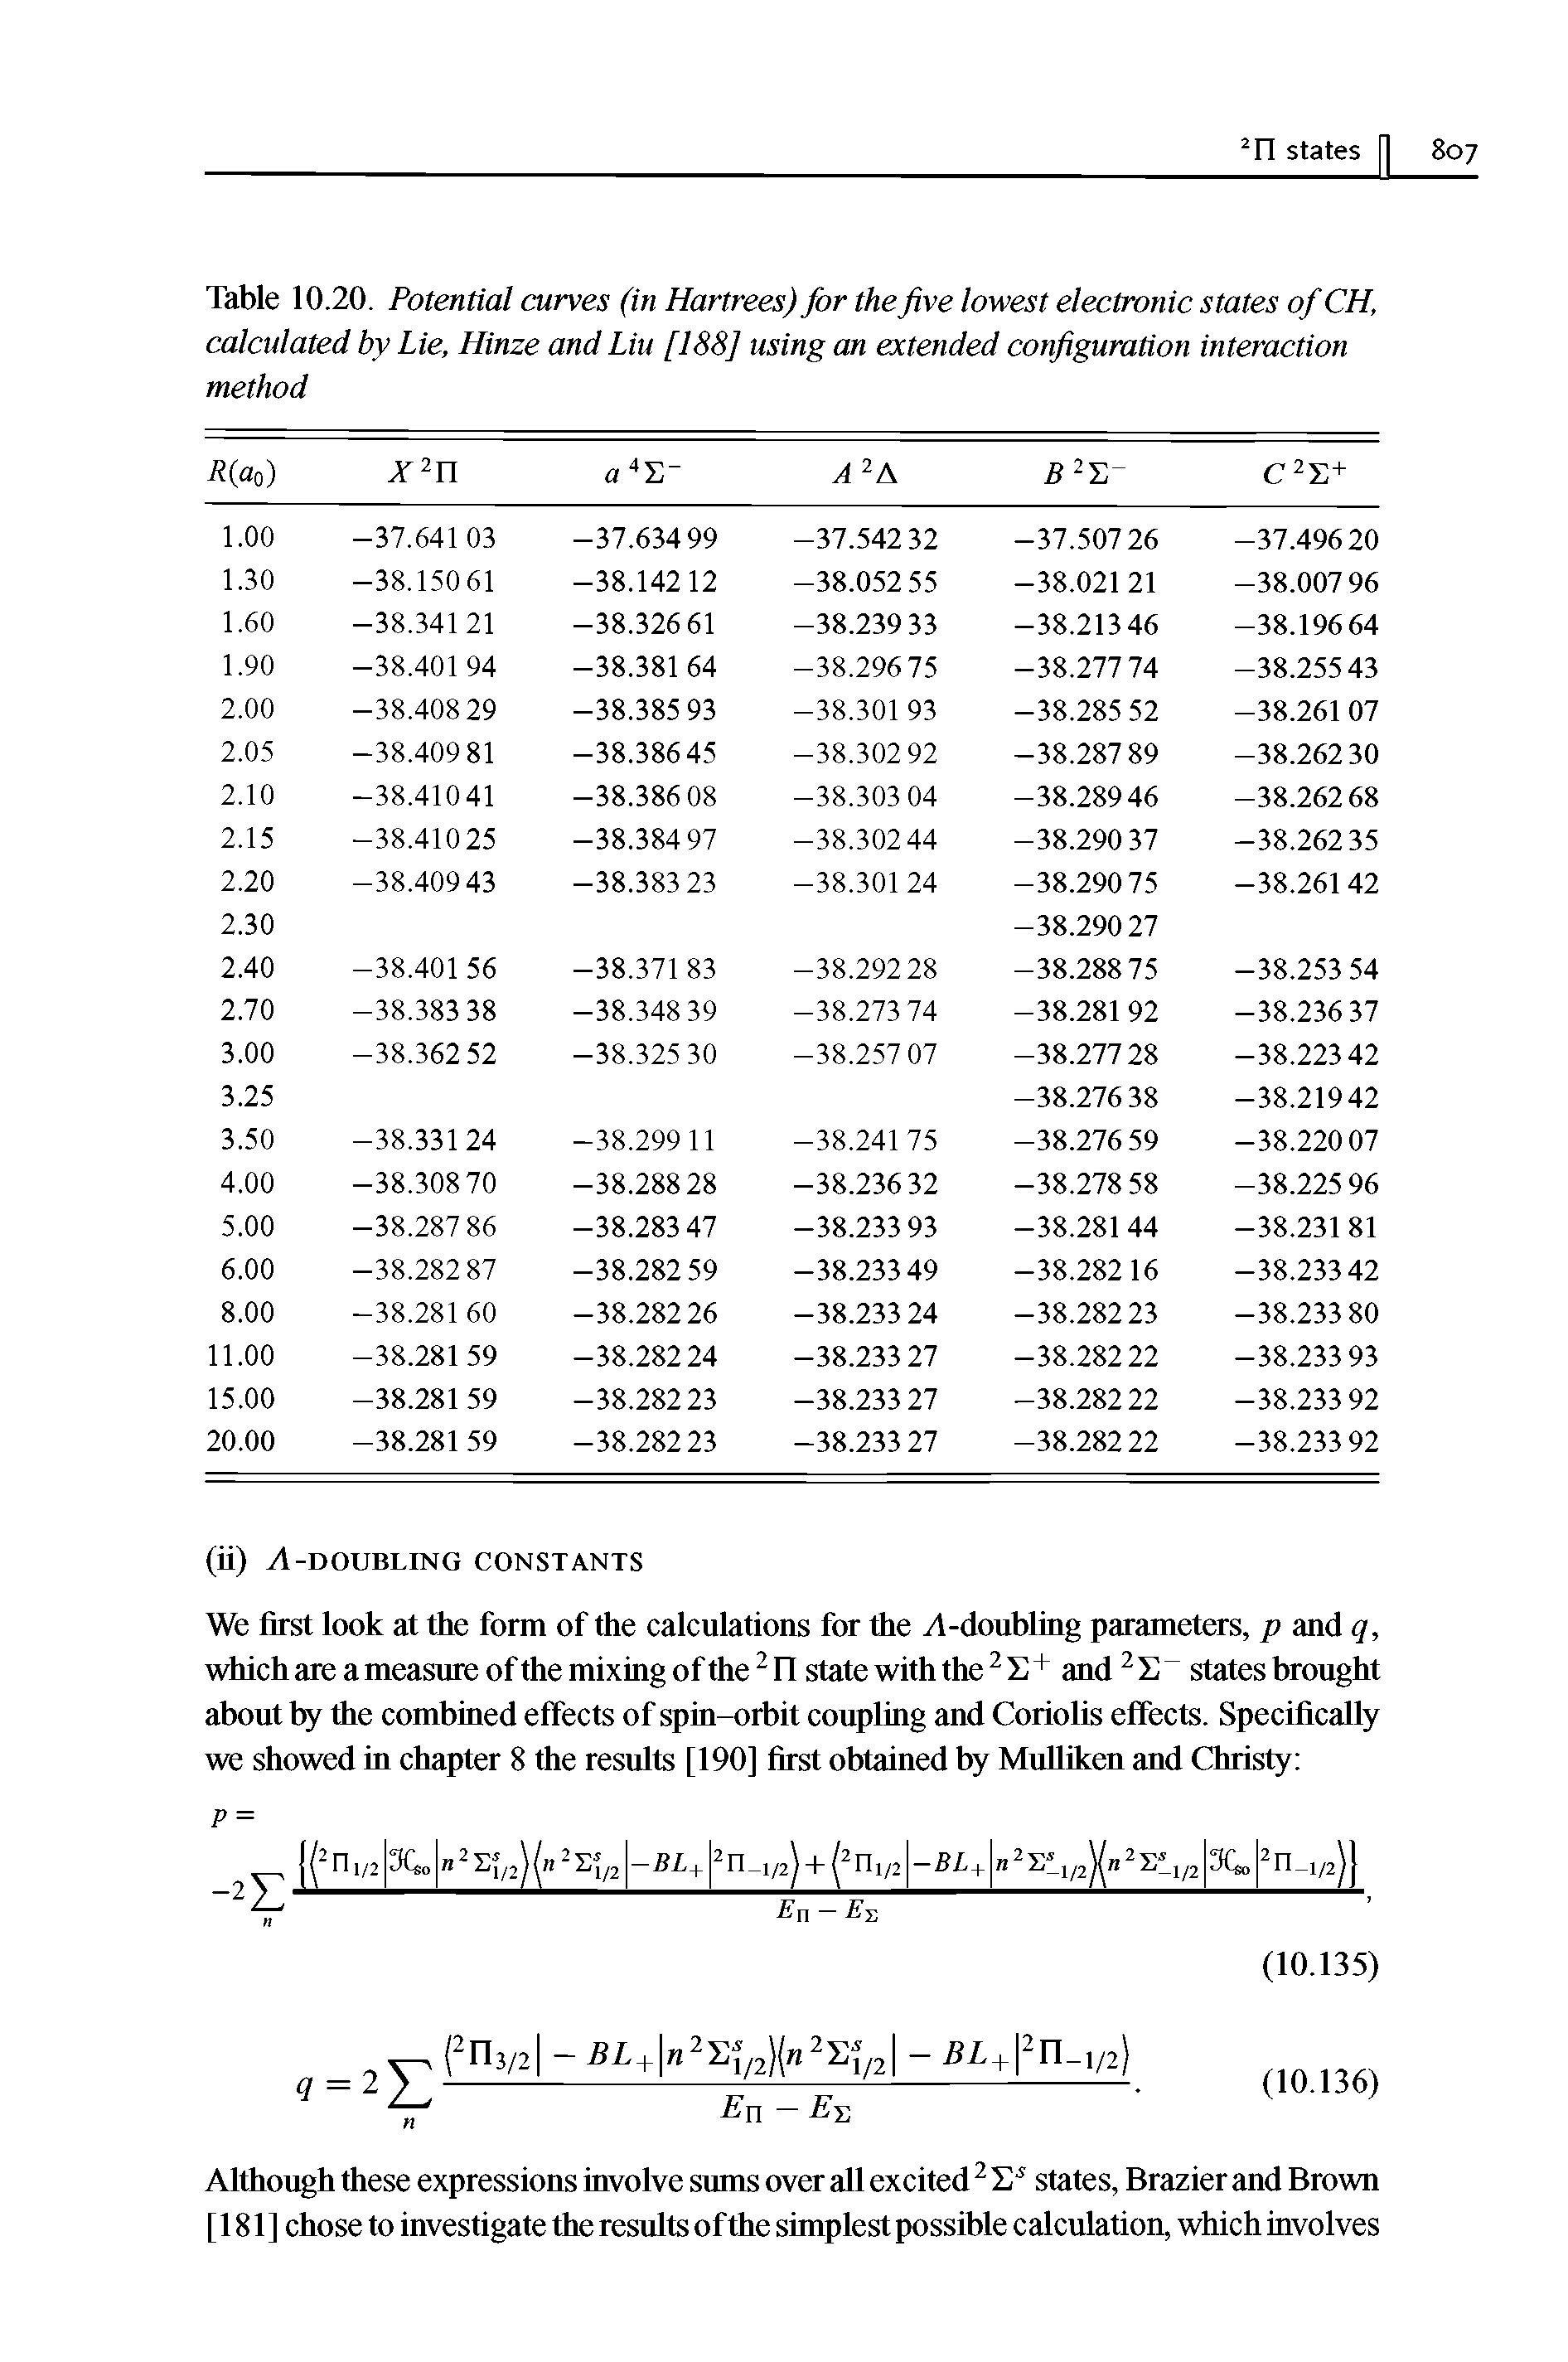 Table 10.20. Potential curves (in Hartrees) for the five lowest electronic states of CH, calculated by Lie, Hinze and Liu [188] using an extended configuration interaction method...